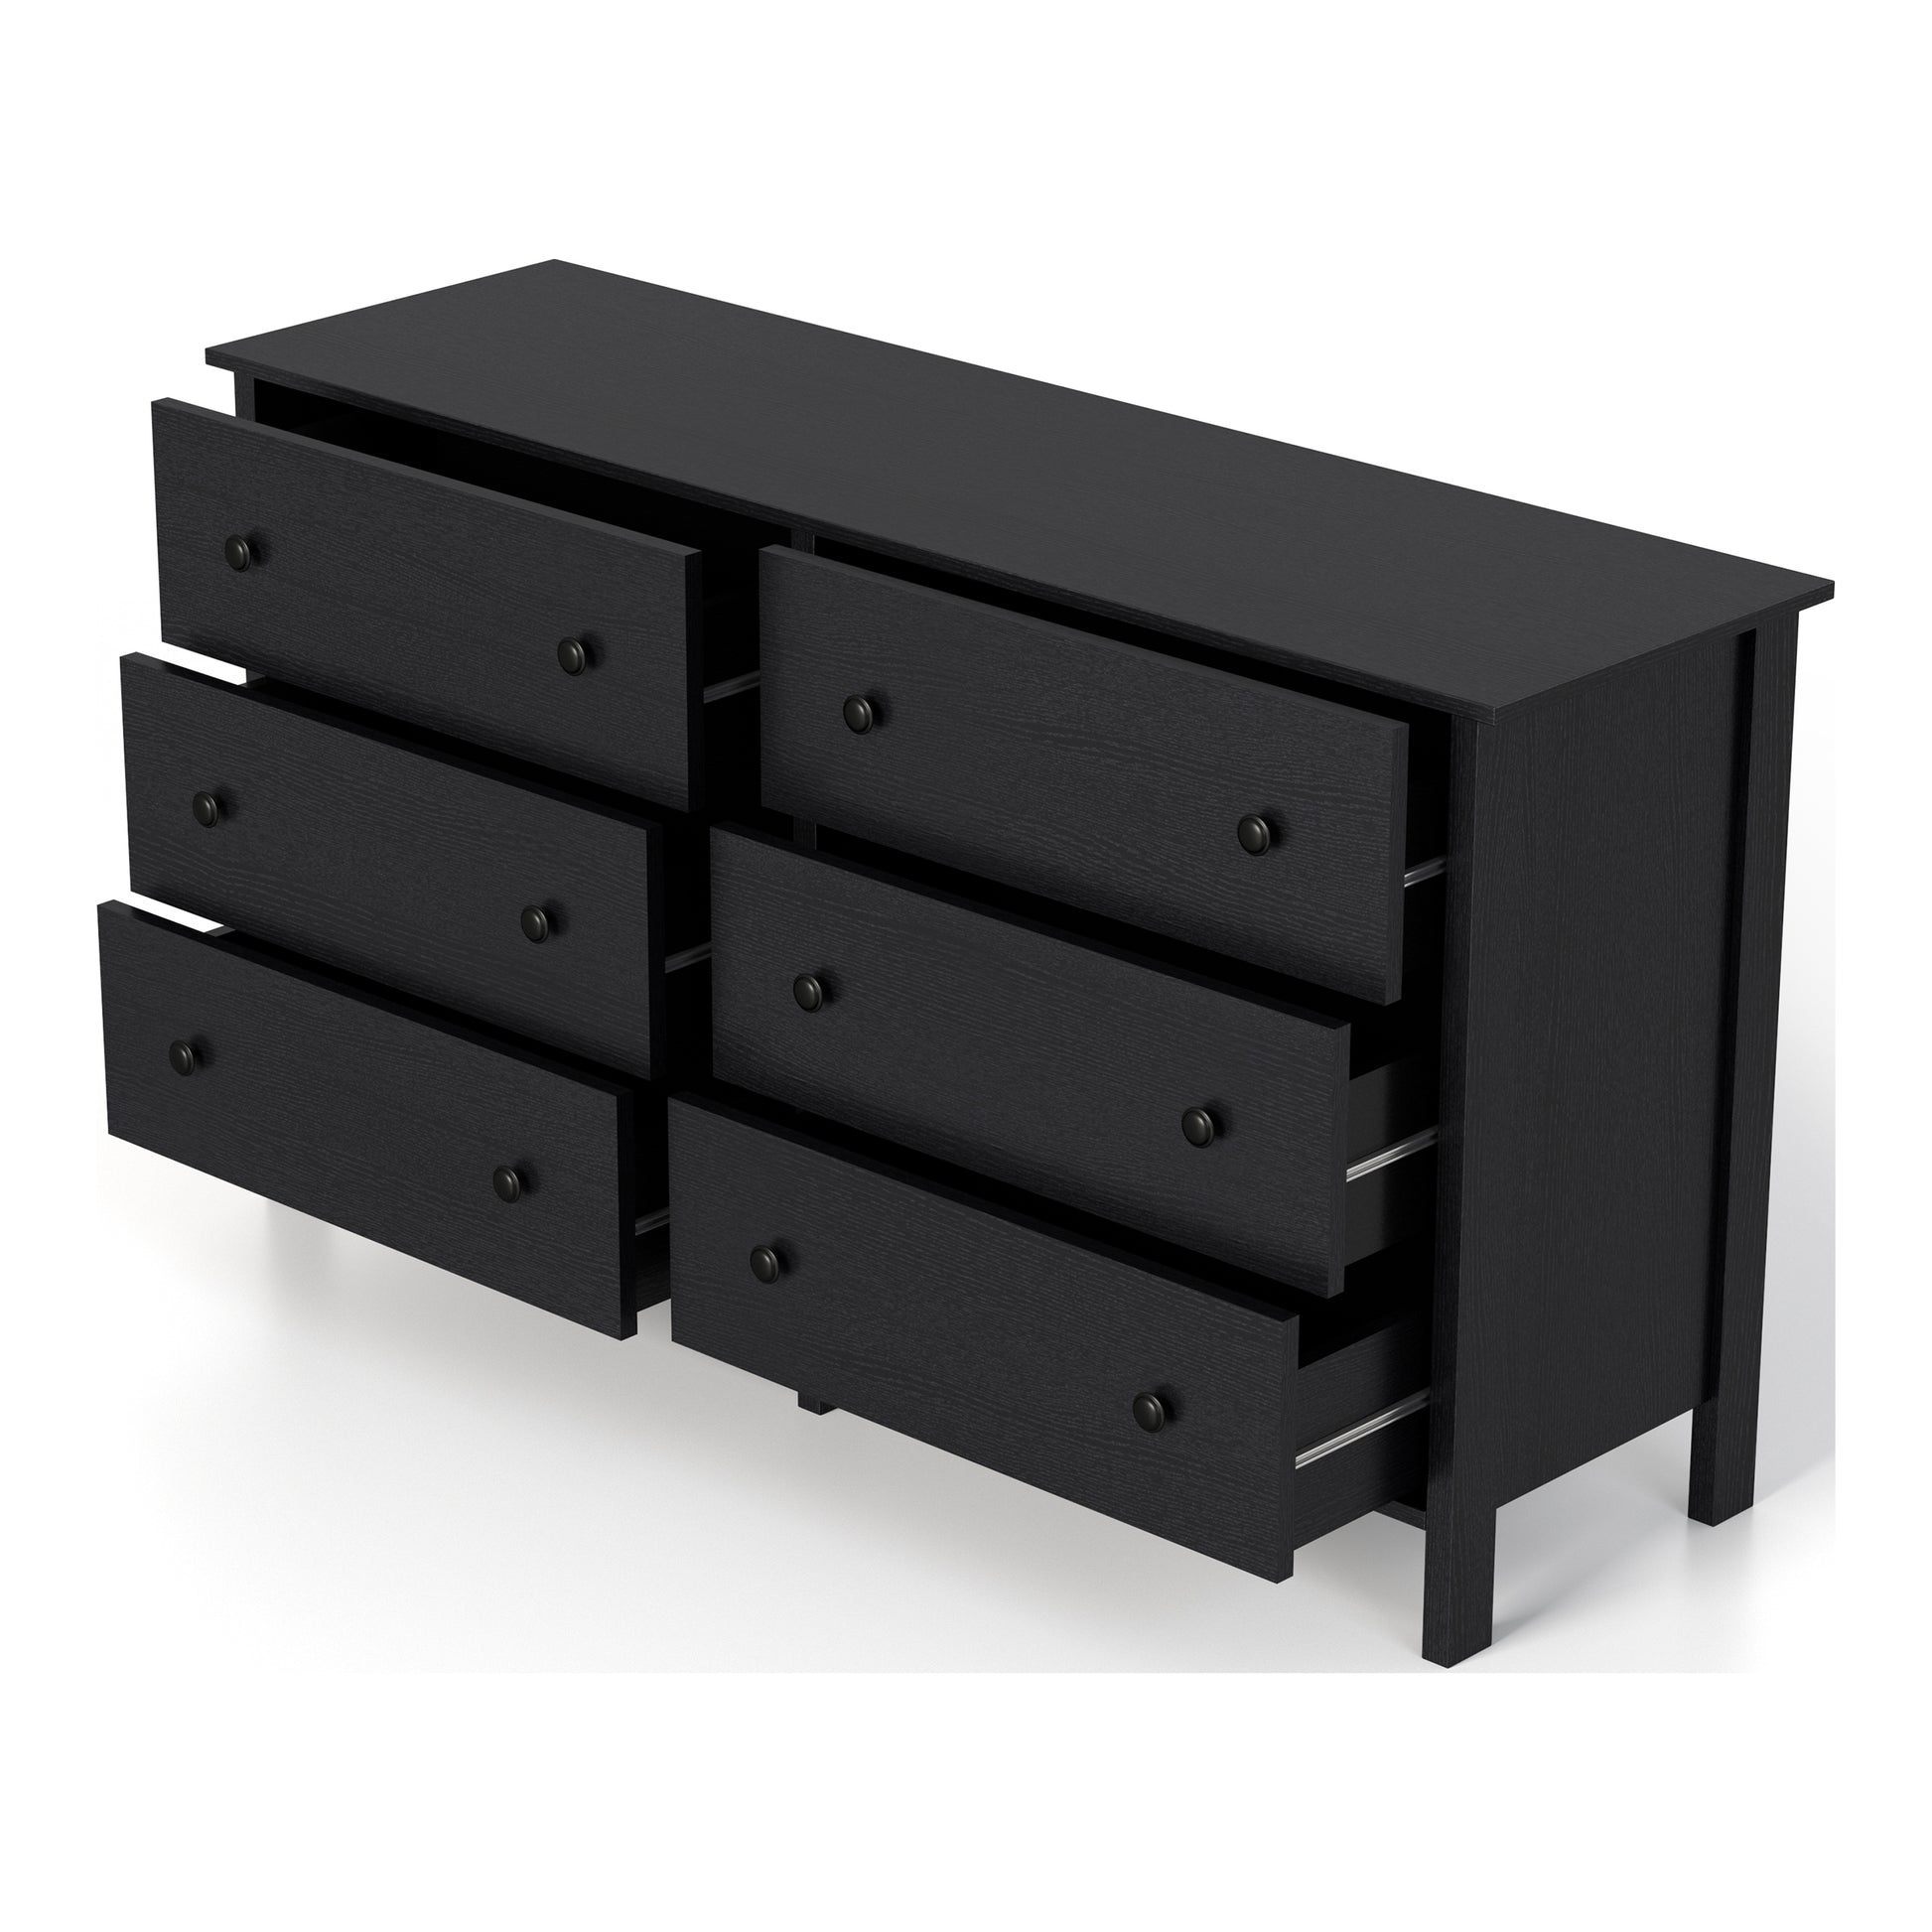 Left angled transitional black six-drawer youth dresser with all drawers open on a white background